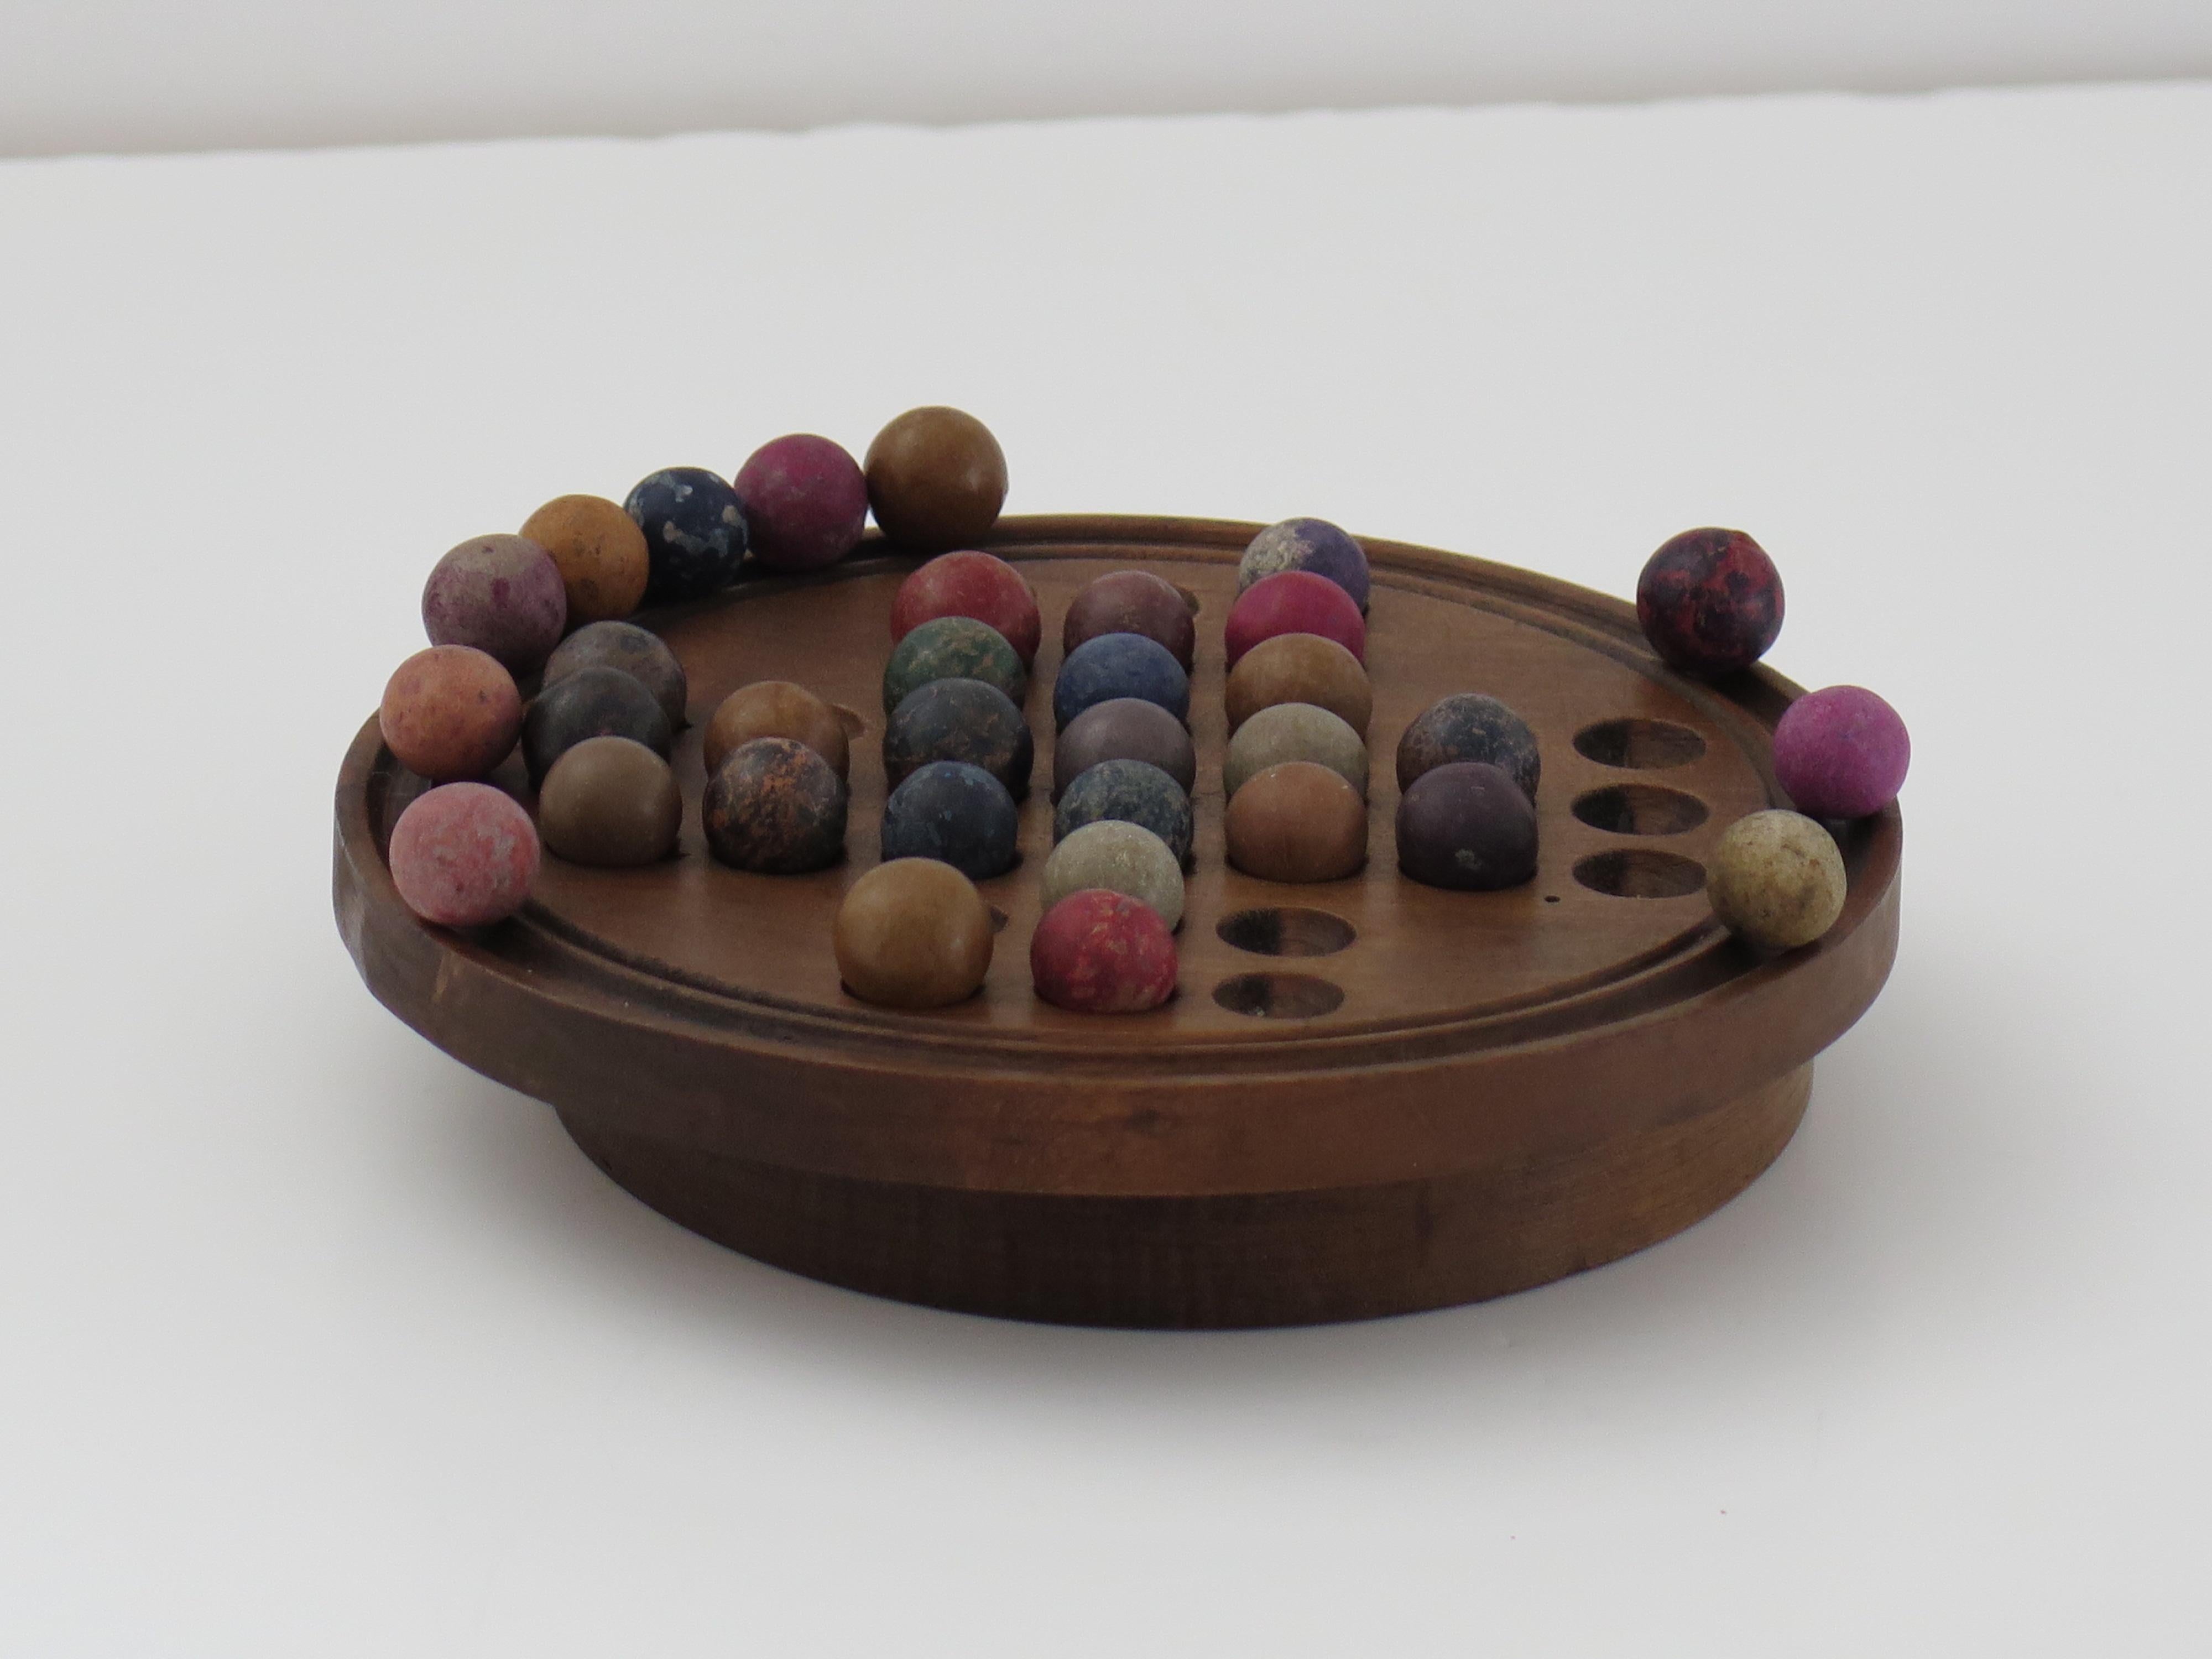 Victorian 19th Century Travelling Marble Solitaire Game with 33 Handmade Clay Marbles